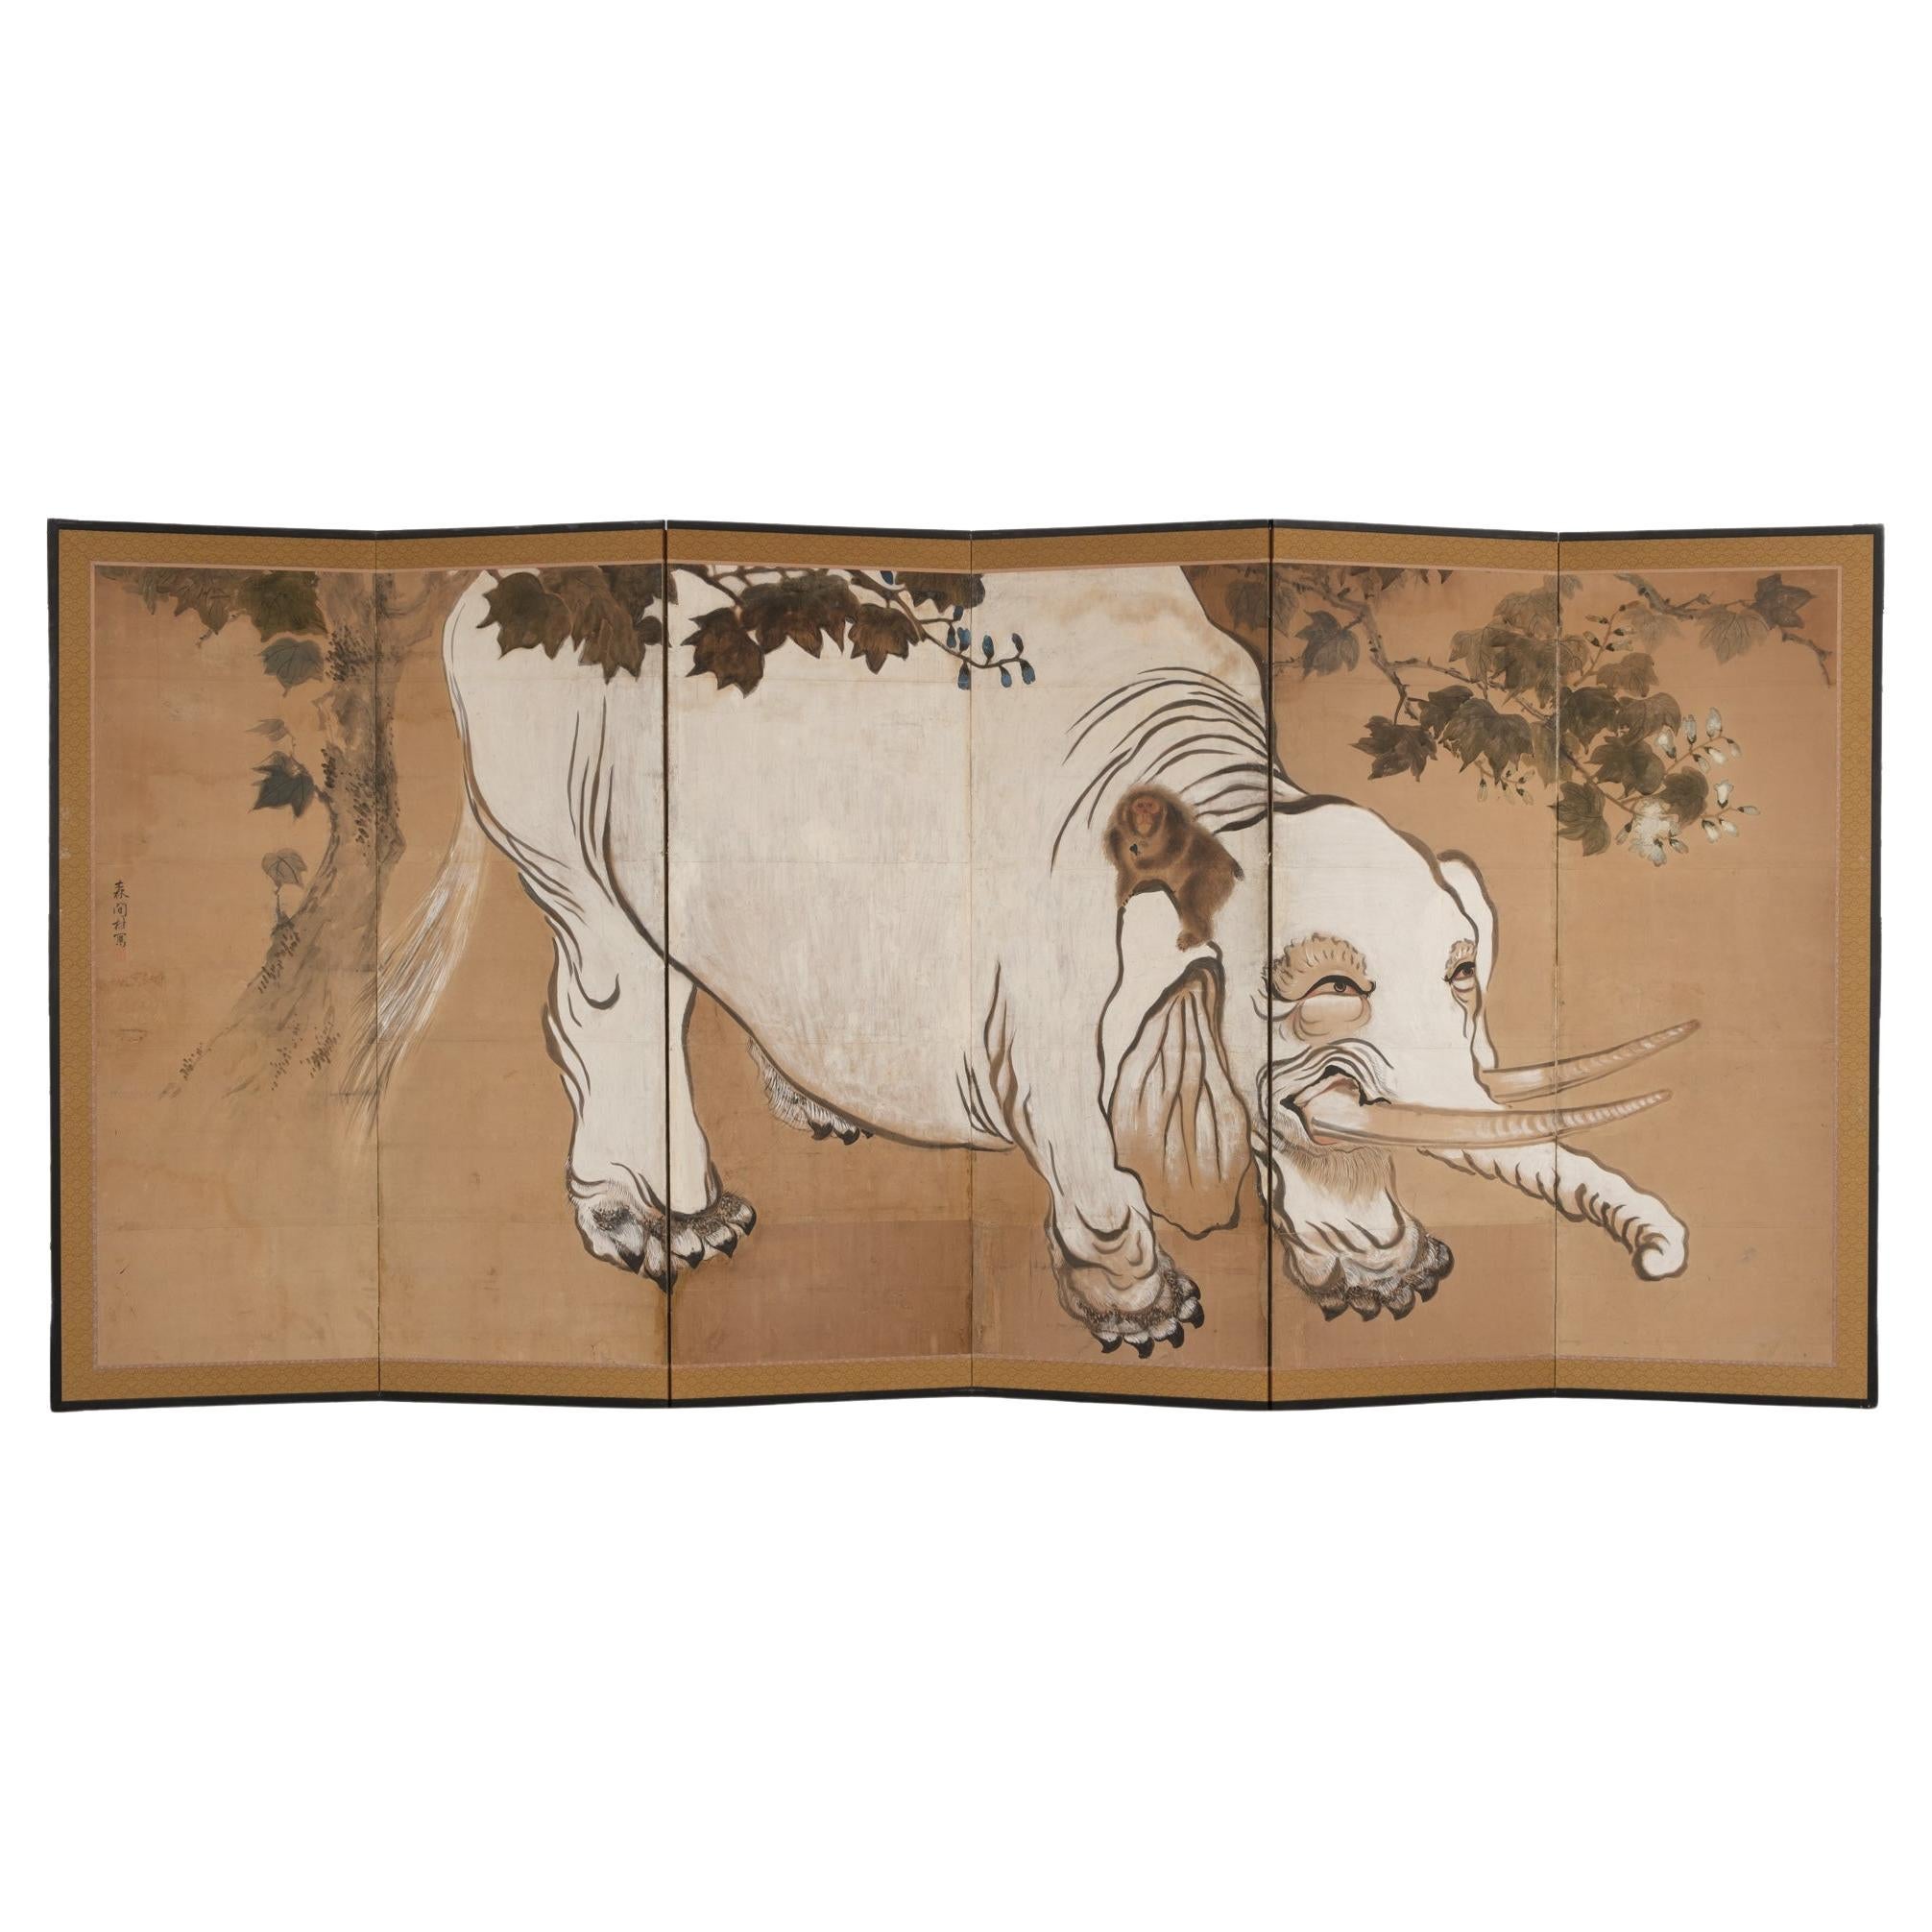 Japanese screen with a painting of an large elephant & monkey by Mori Kanson 森間村 For Sale